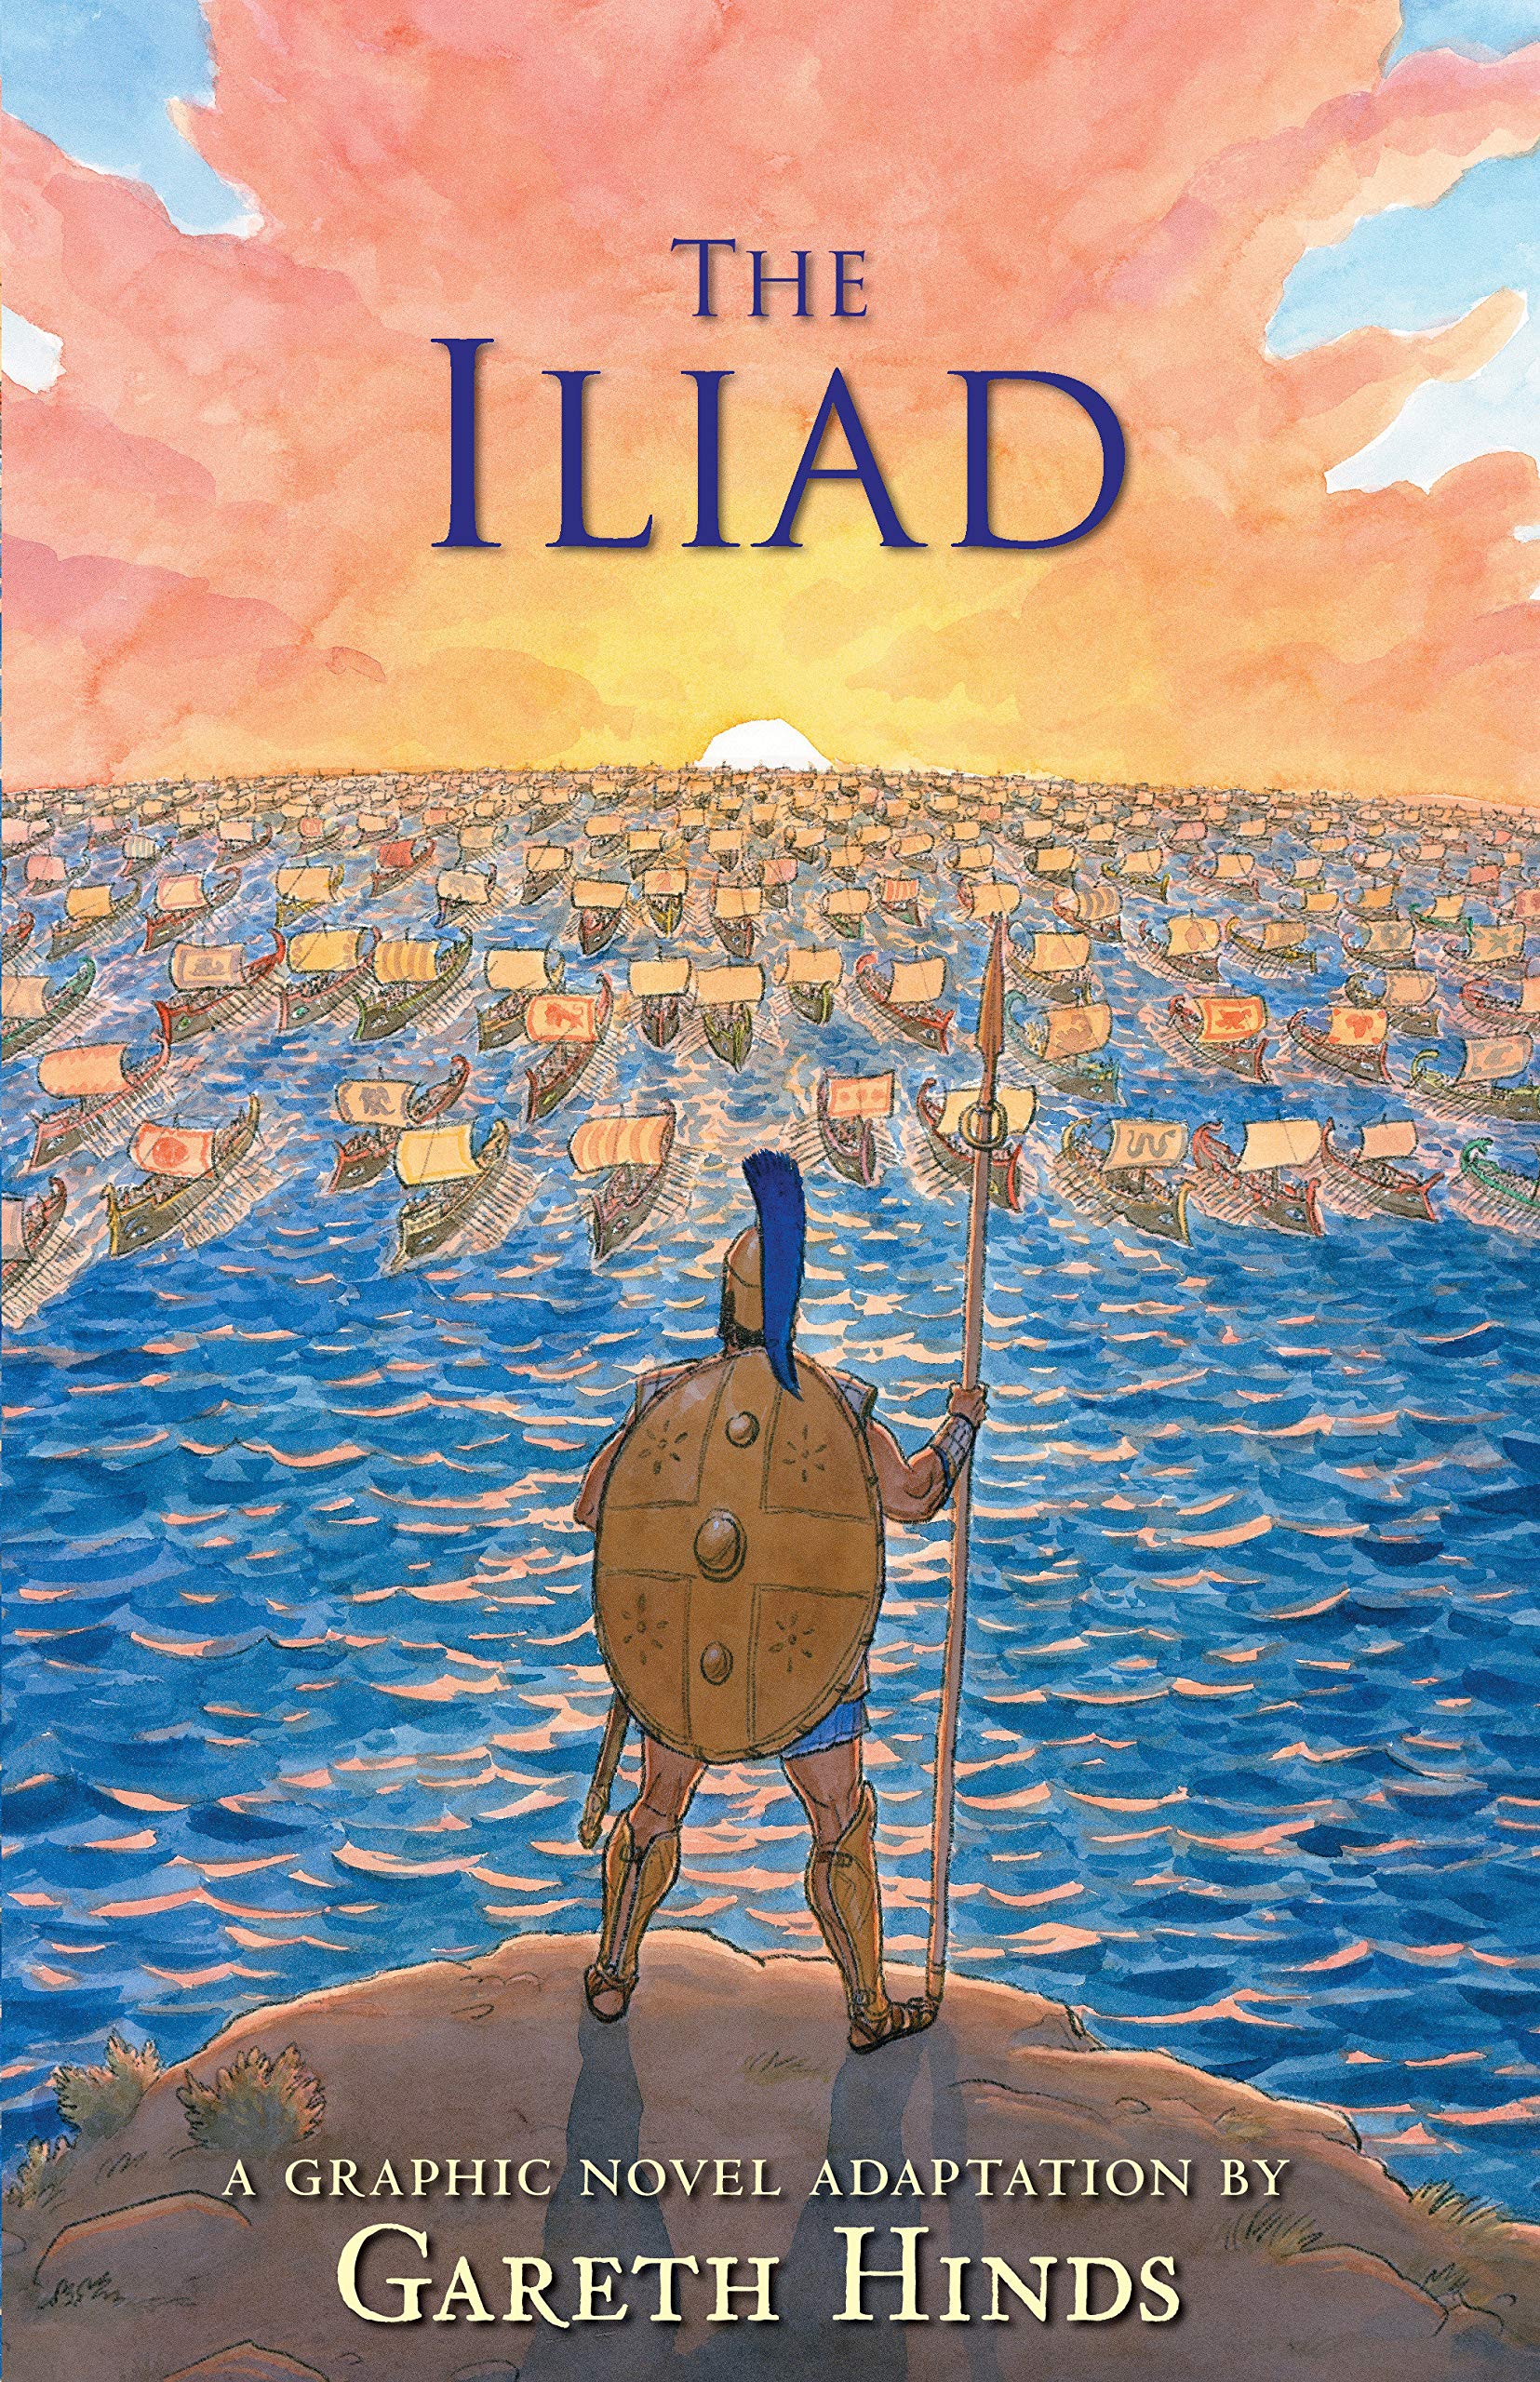 The Iliad by Gareth Hinds, a graphic novel, was published earlier this year by Candlewick Press